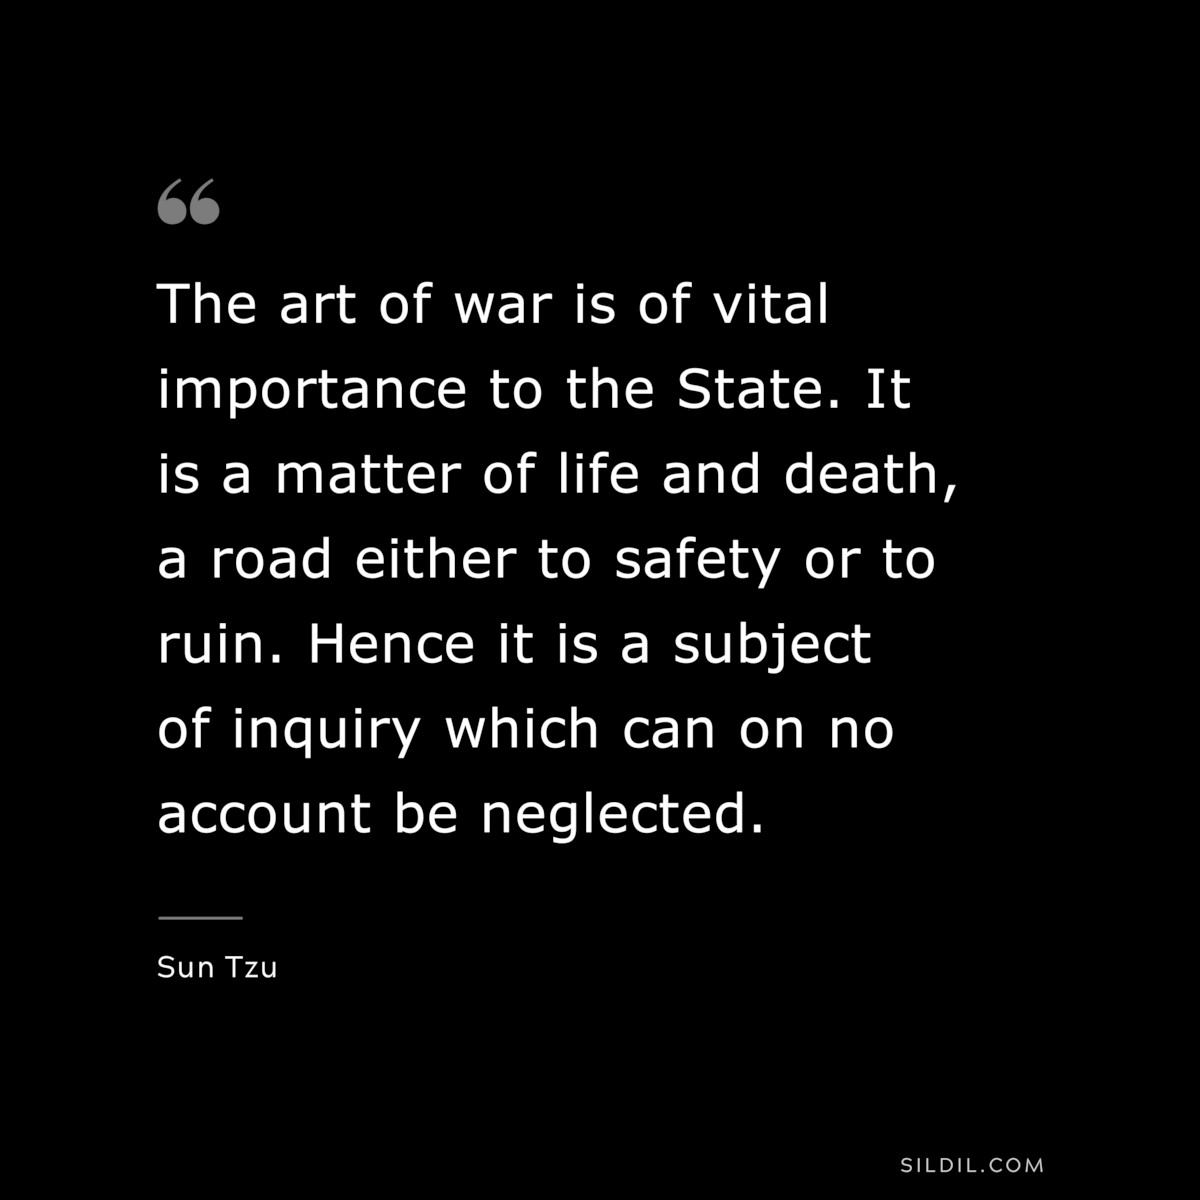 The art of war is of vital importance to the State. It is a matter of life and death, a road either to safety or to ruin. Hence it is a subject of inquiry which can on no account be neglected.― Sun Tzu